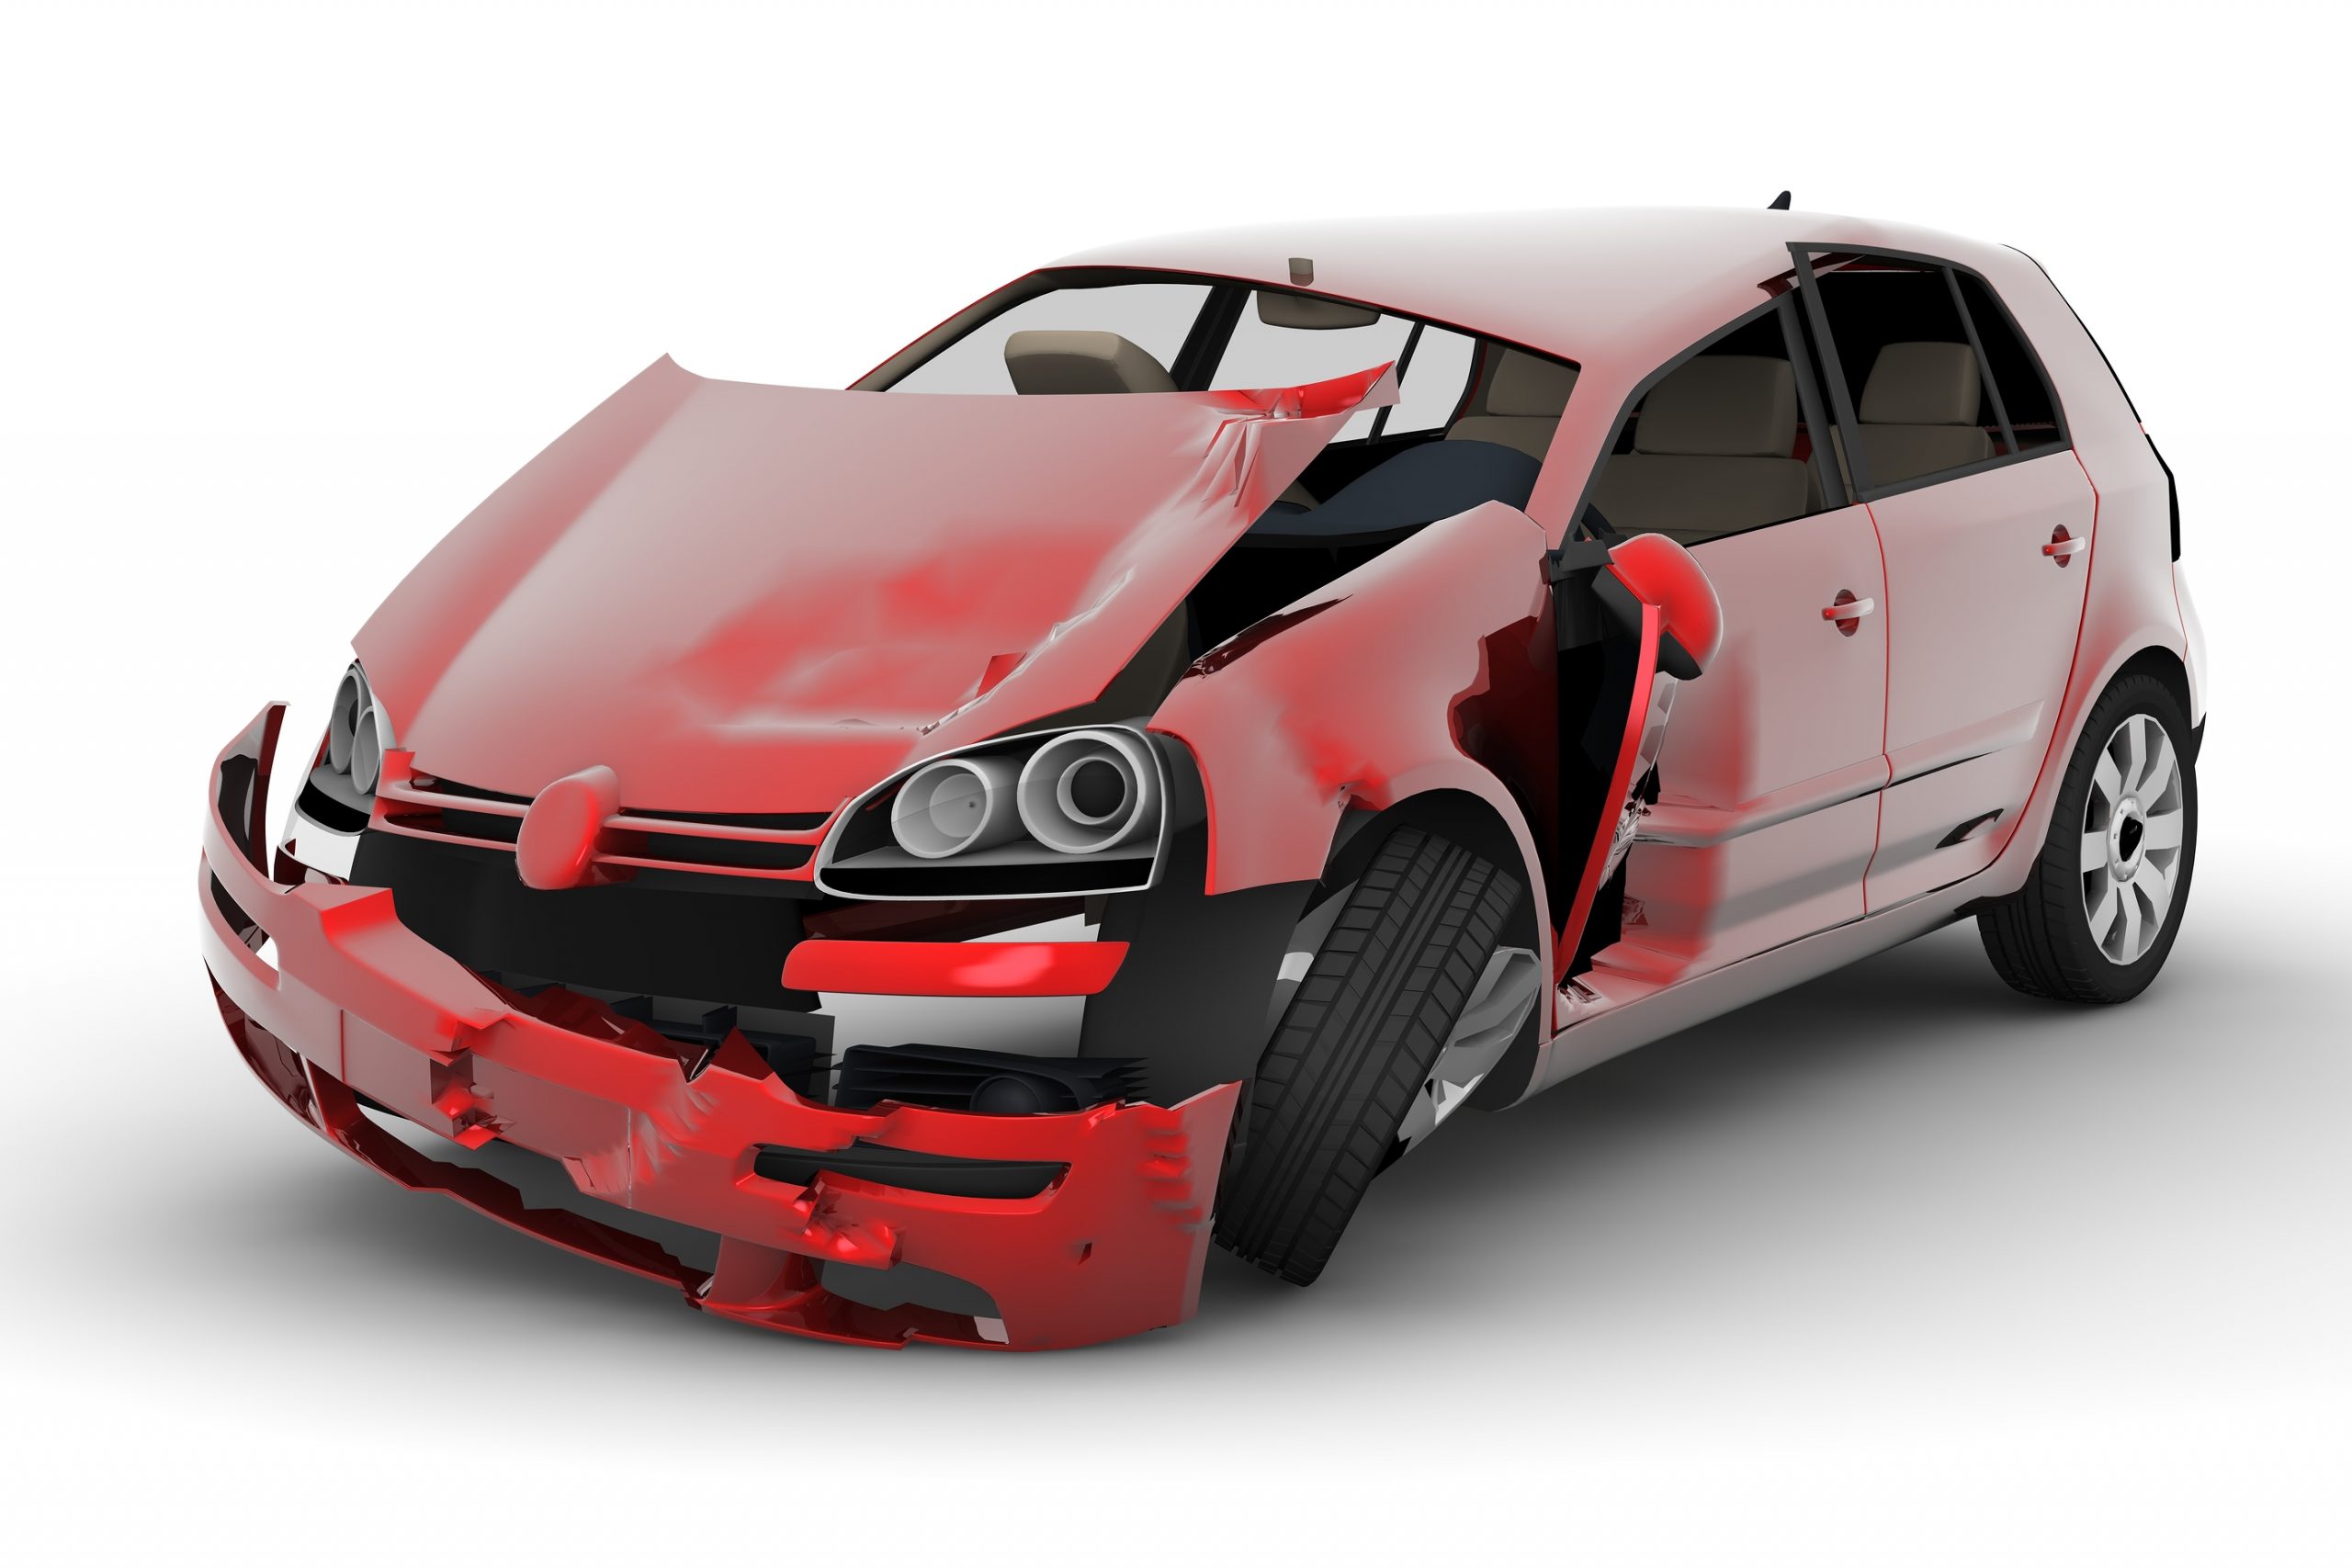 The Hard Truth About Selling a Totaled Car – The Good, The Bad, and The Ugly